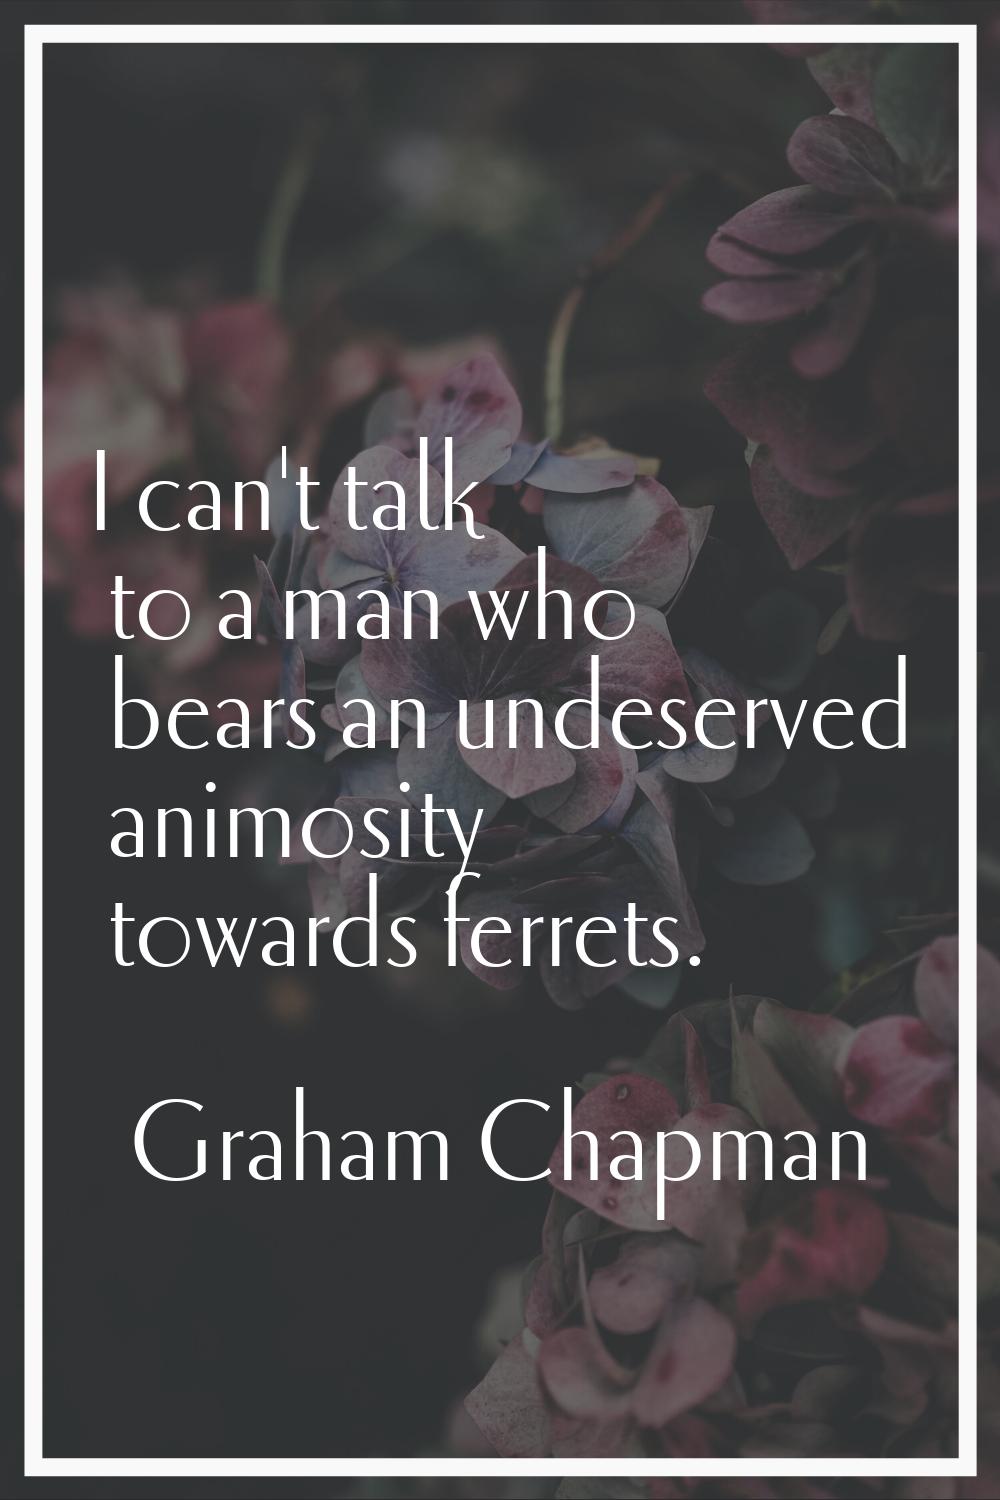 I can't talk to a man who bears an undeserved animosity towards ferrets.